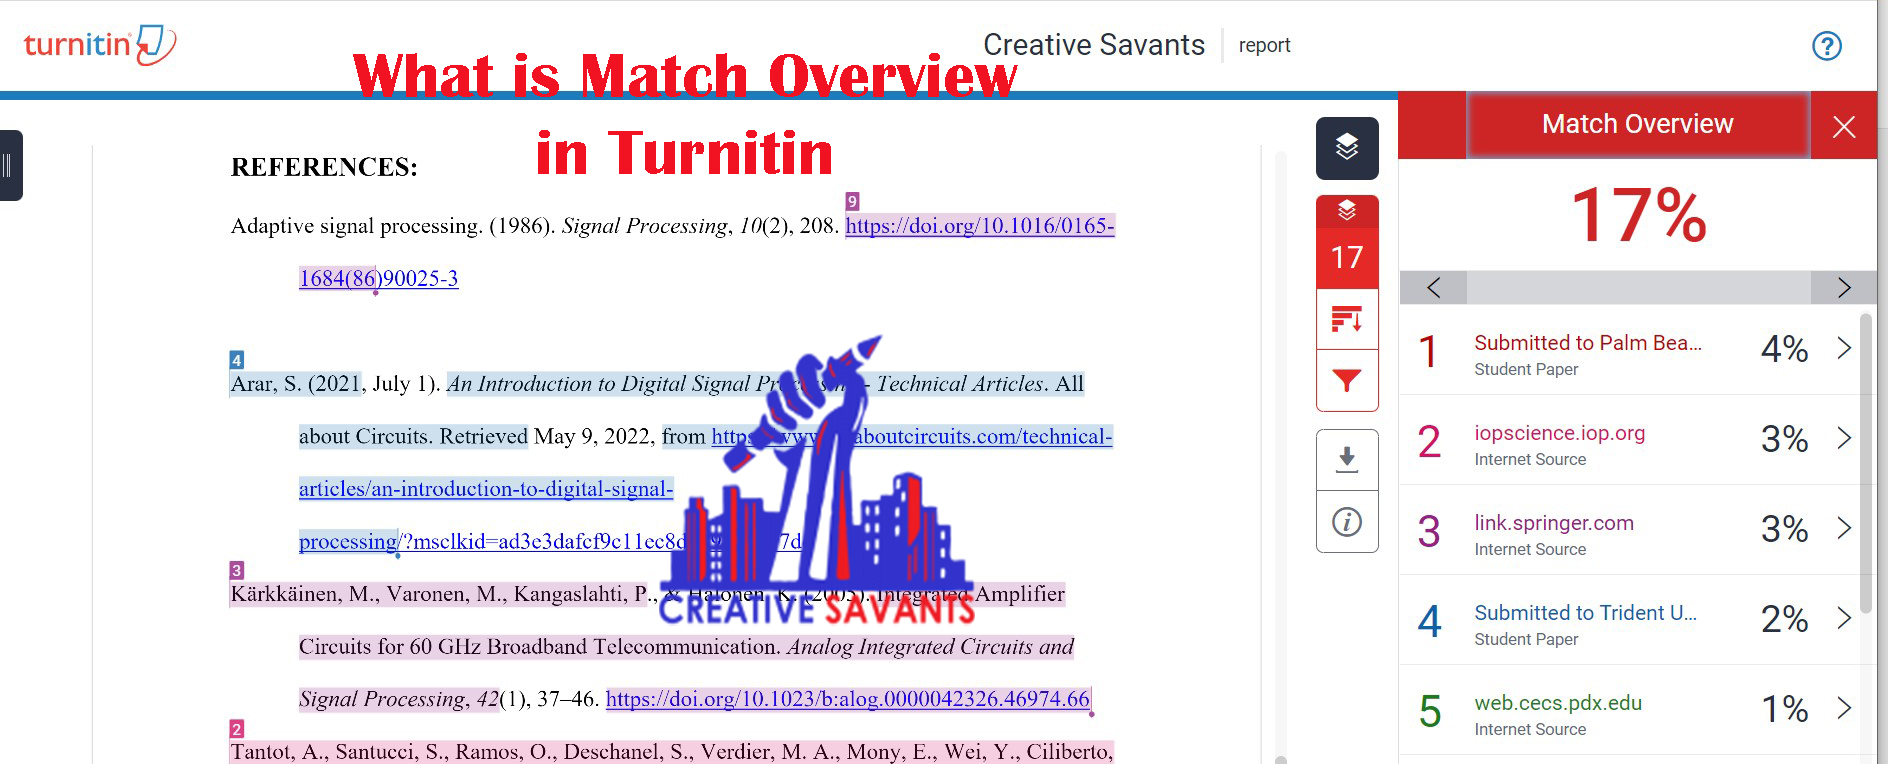 what is match overview tab in turnitin